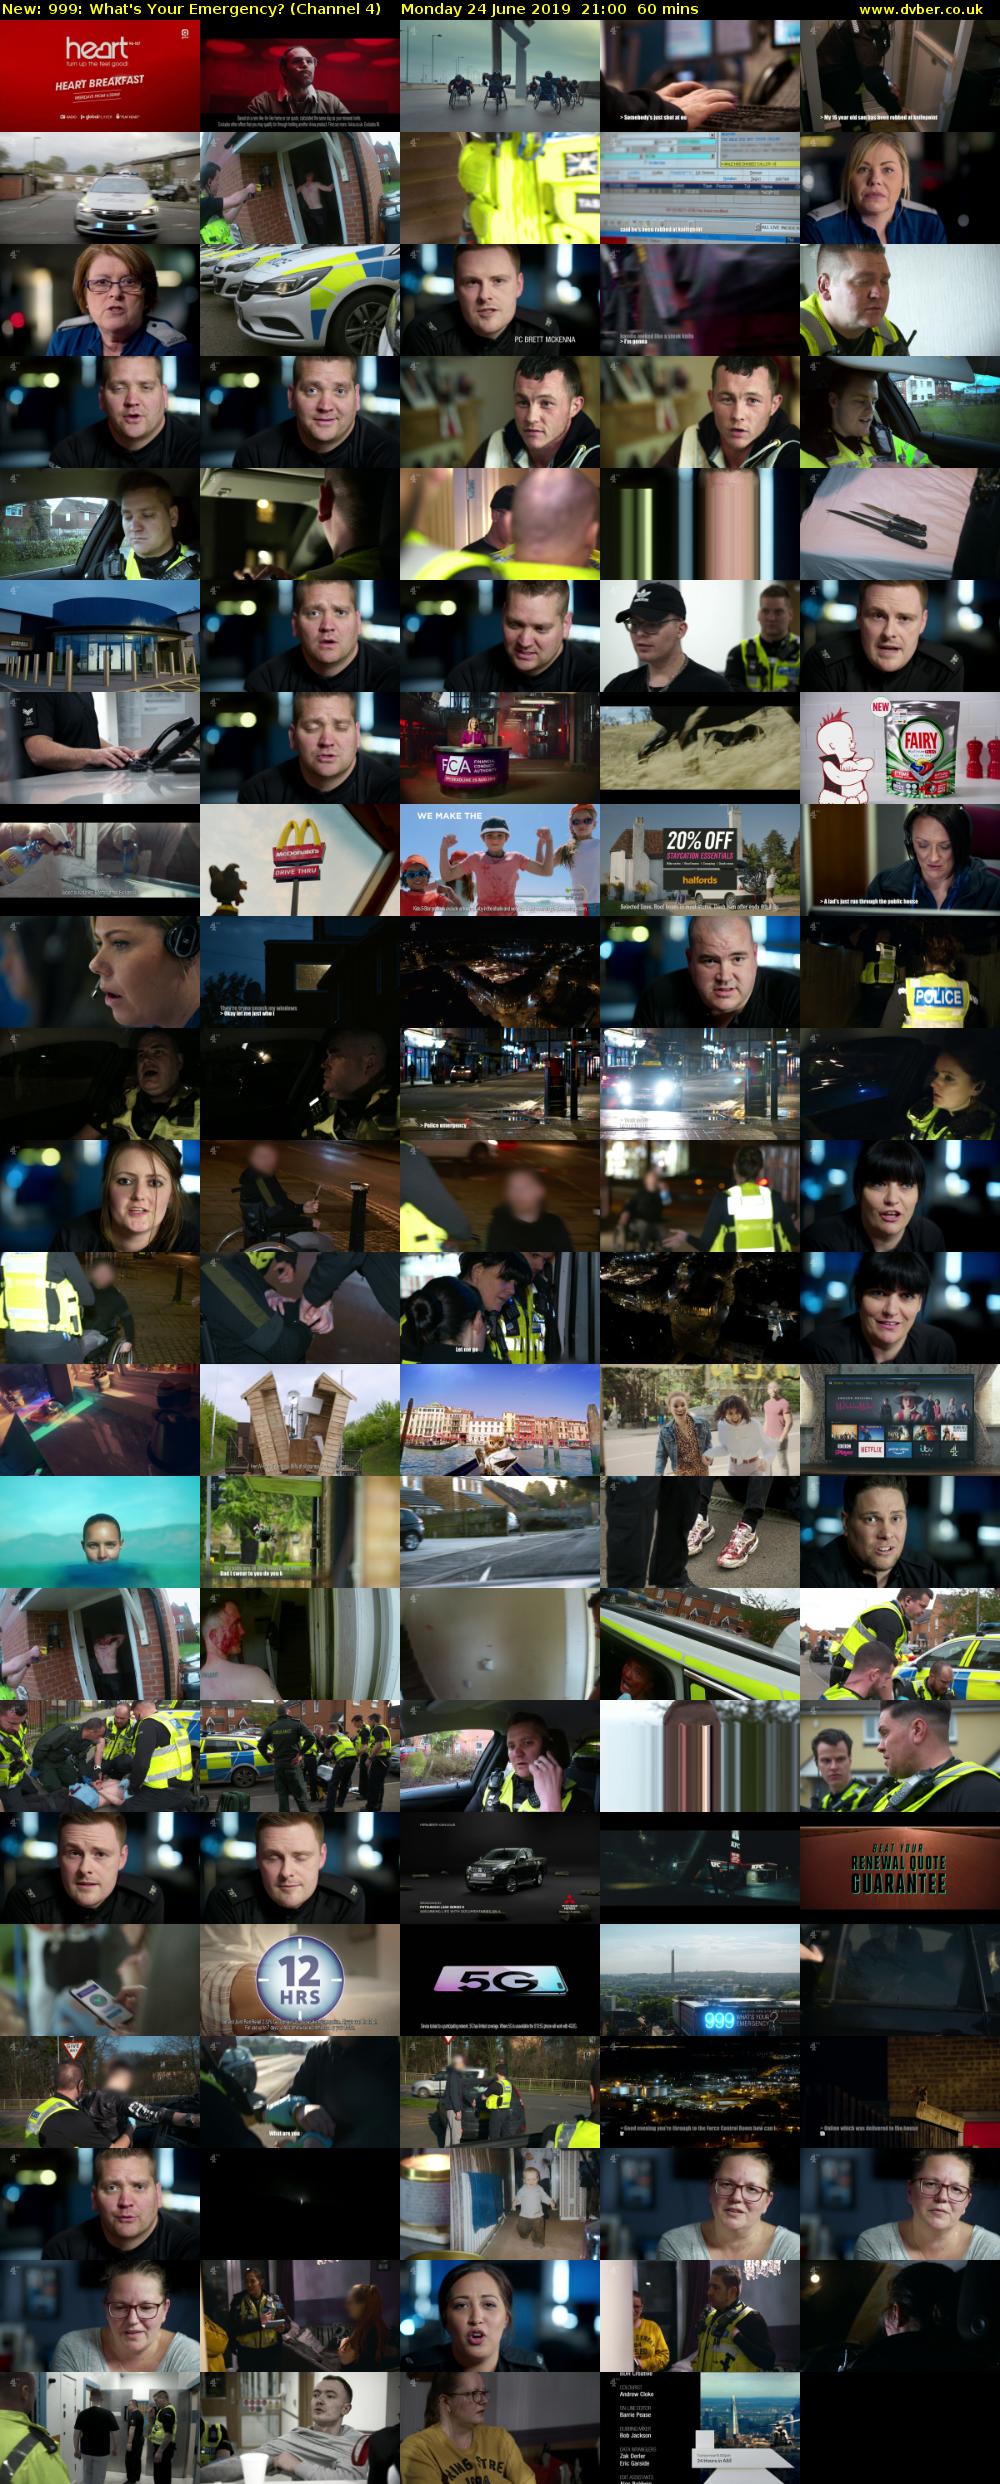 999: What's Your Emergency? (Channel 4) Monday 24 June 2019 21:00 - 22:00